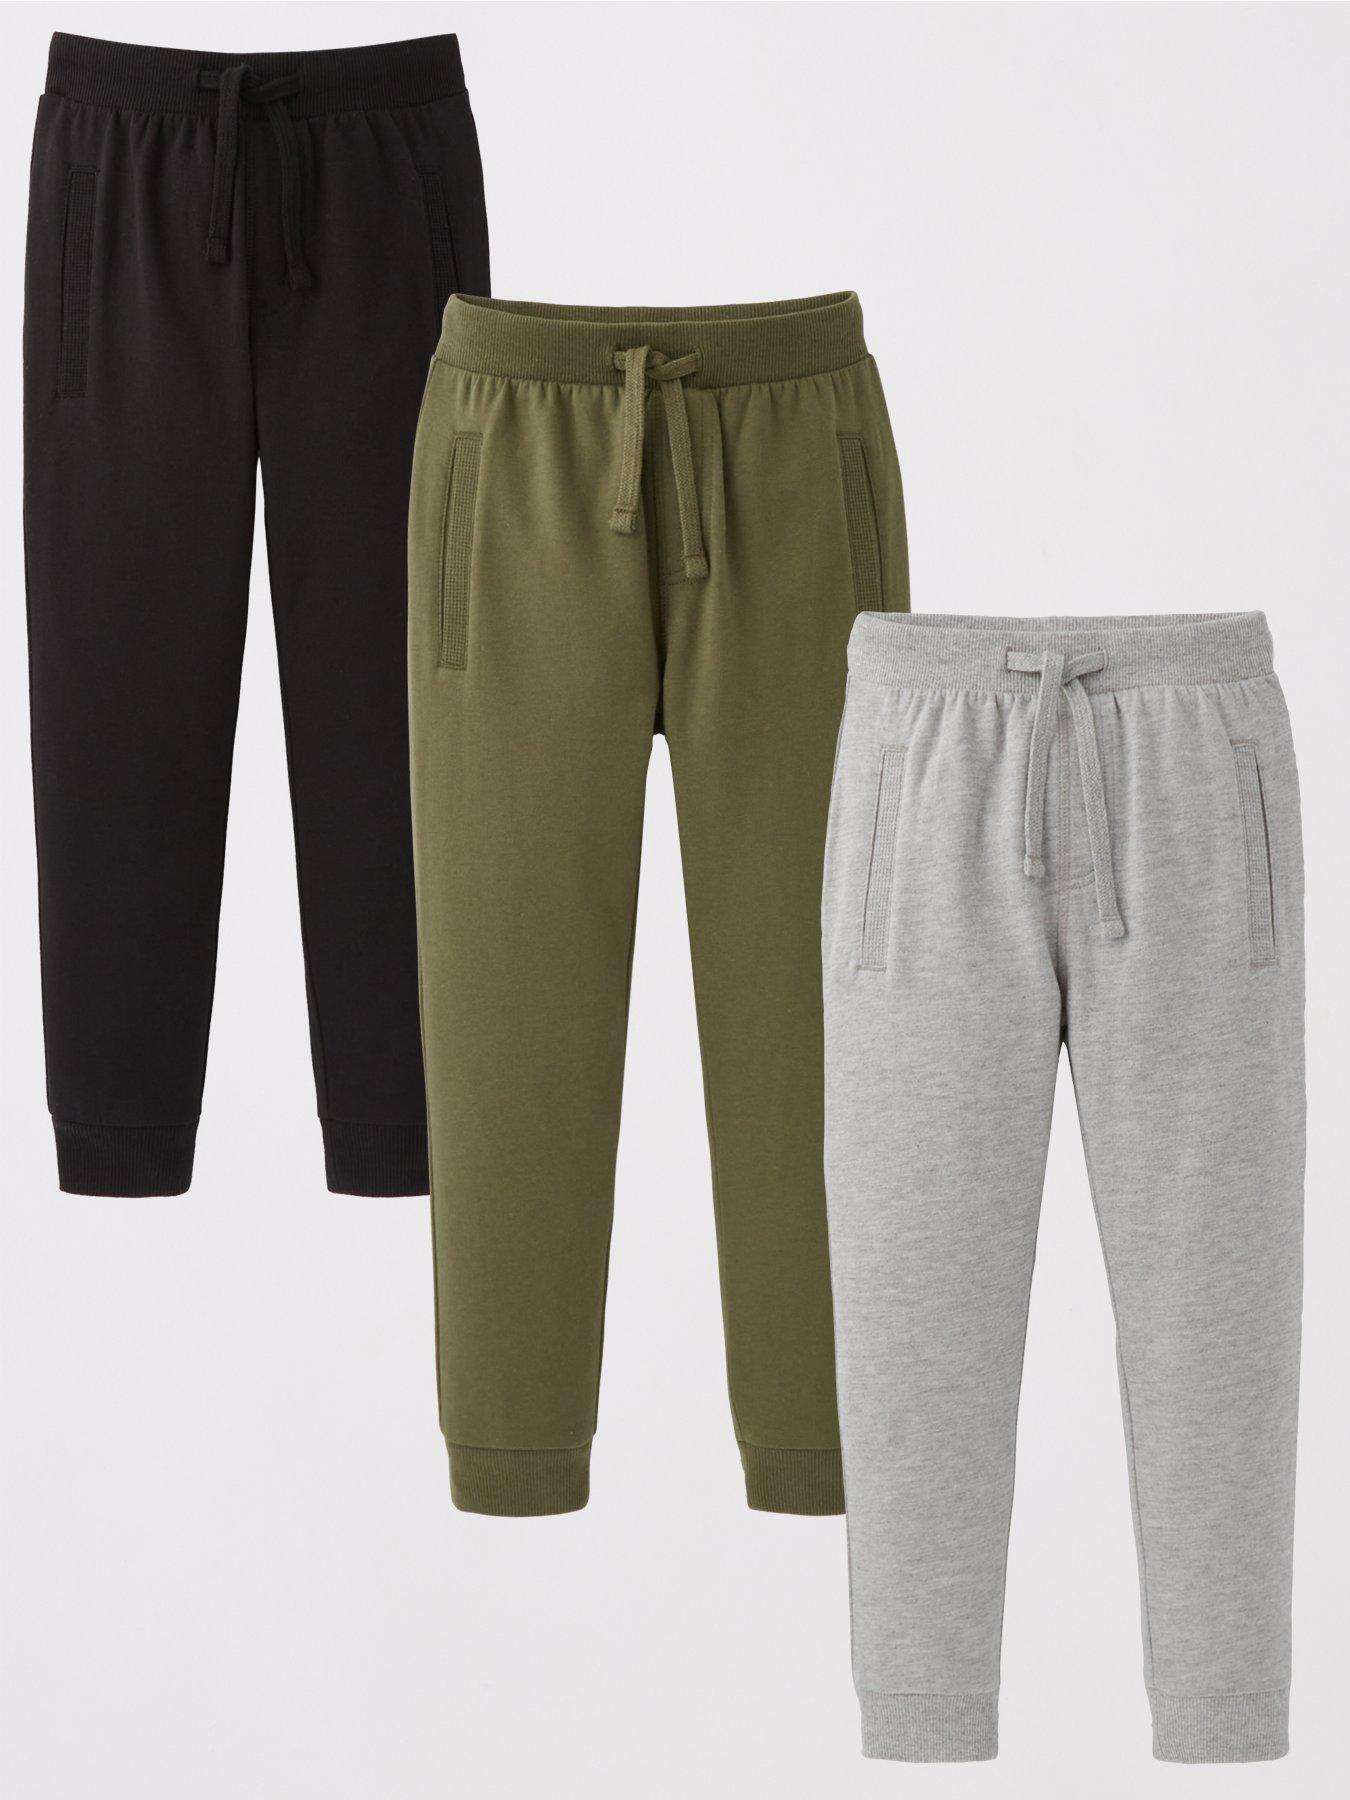 Jogging bottoms, Boys clothes, Child & baby